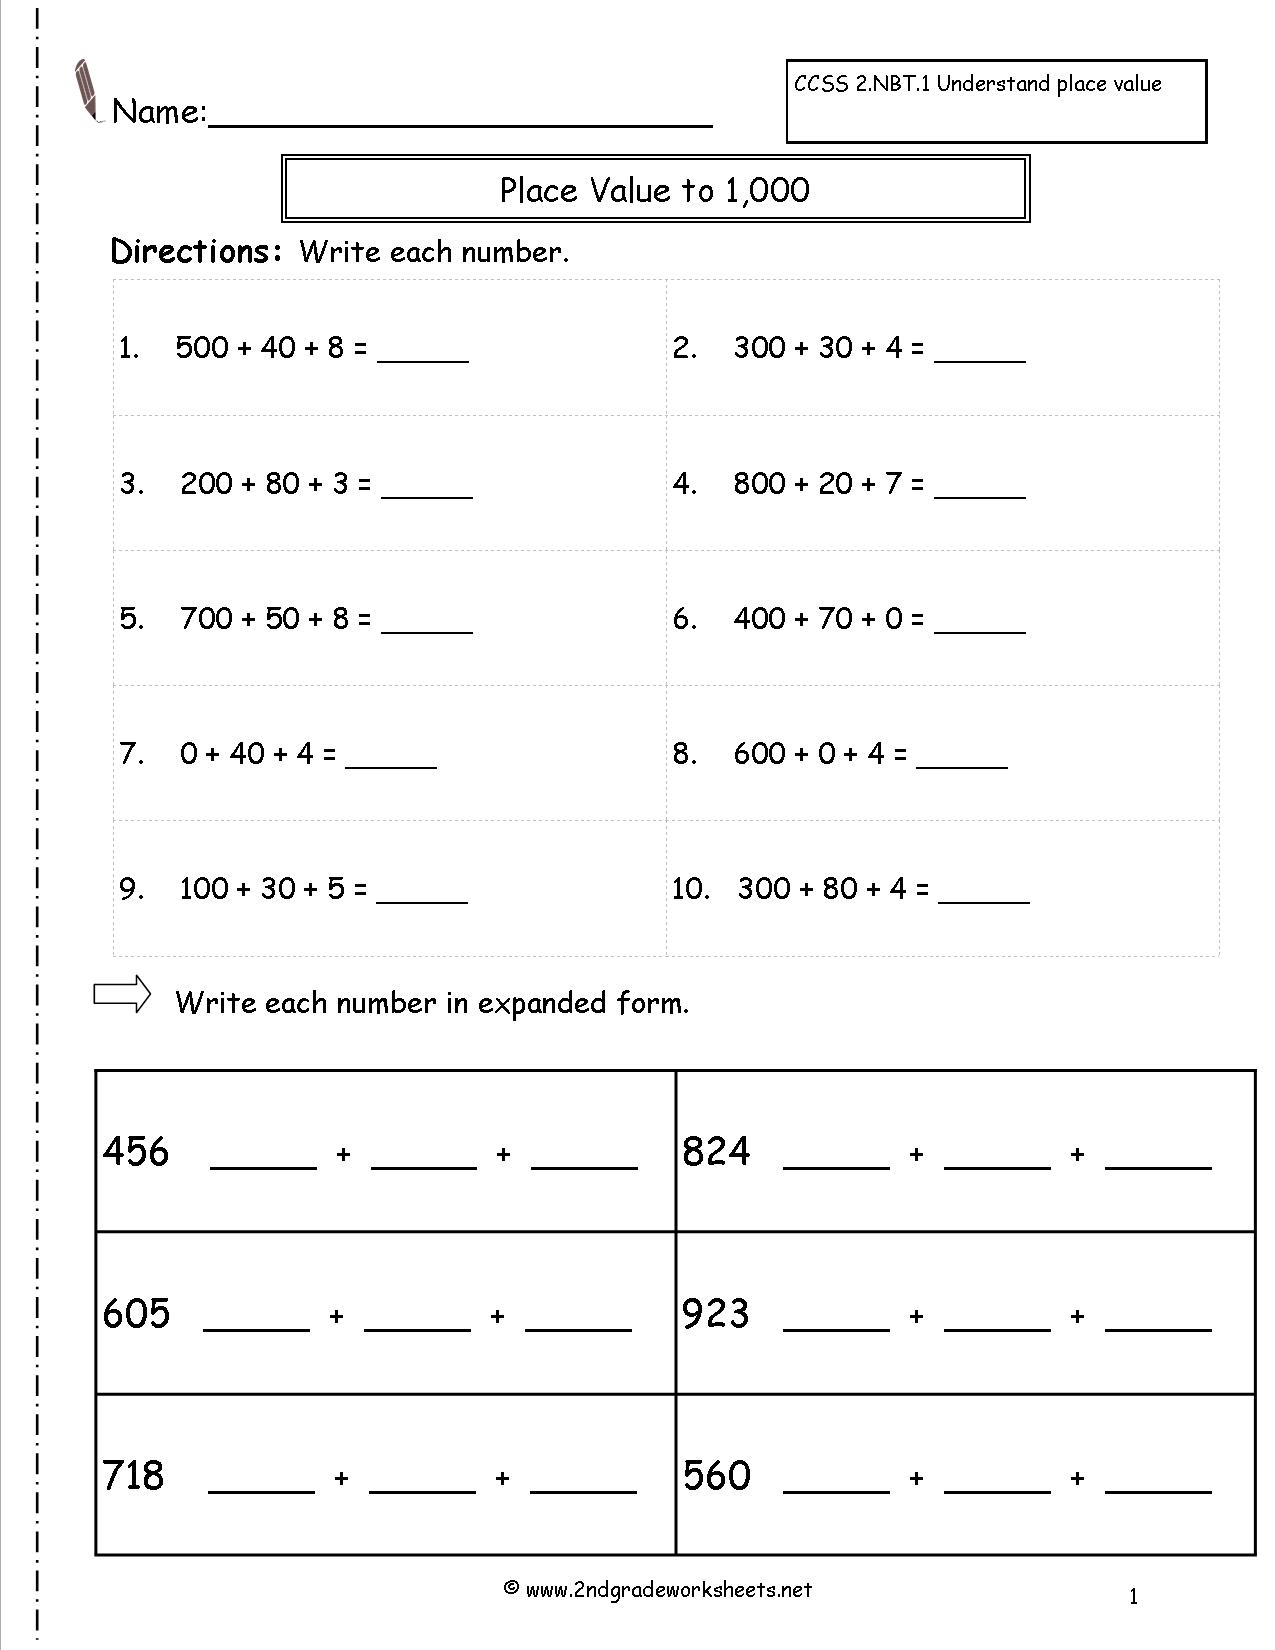 Numbers in Expanded Form Worksheets 2nd Grade Image